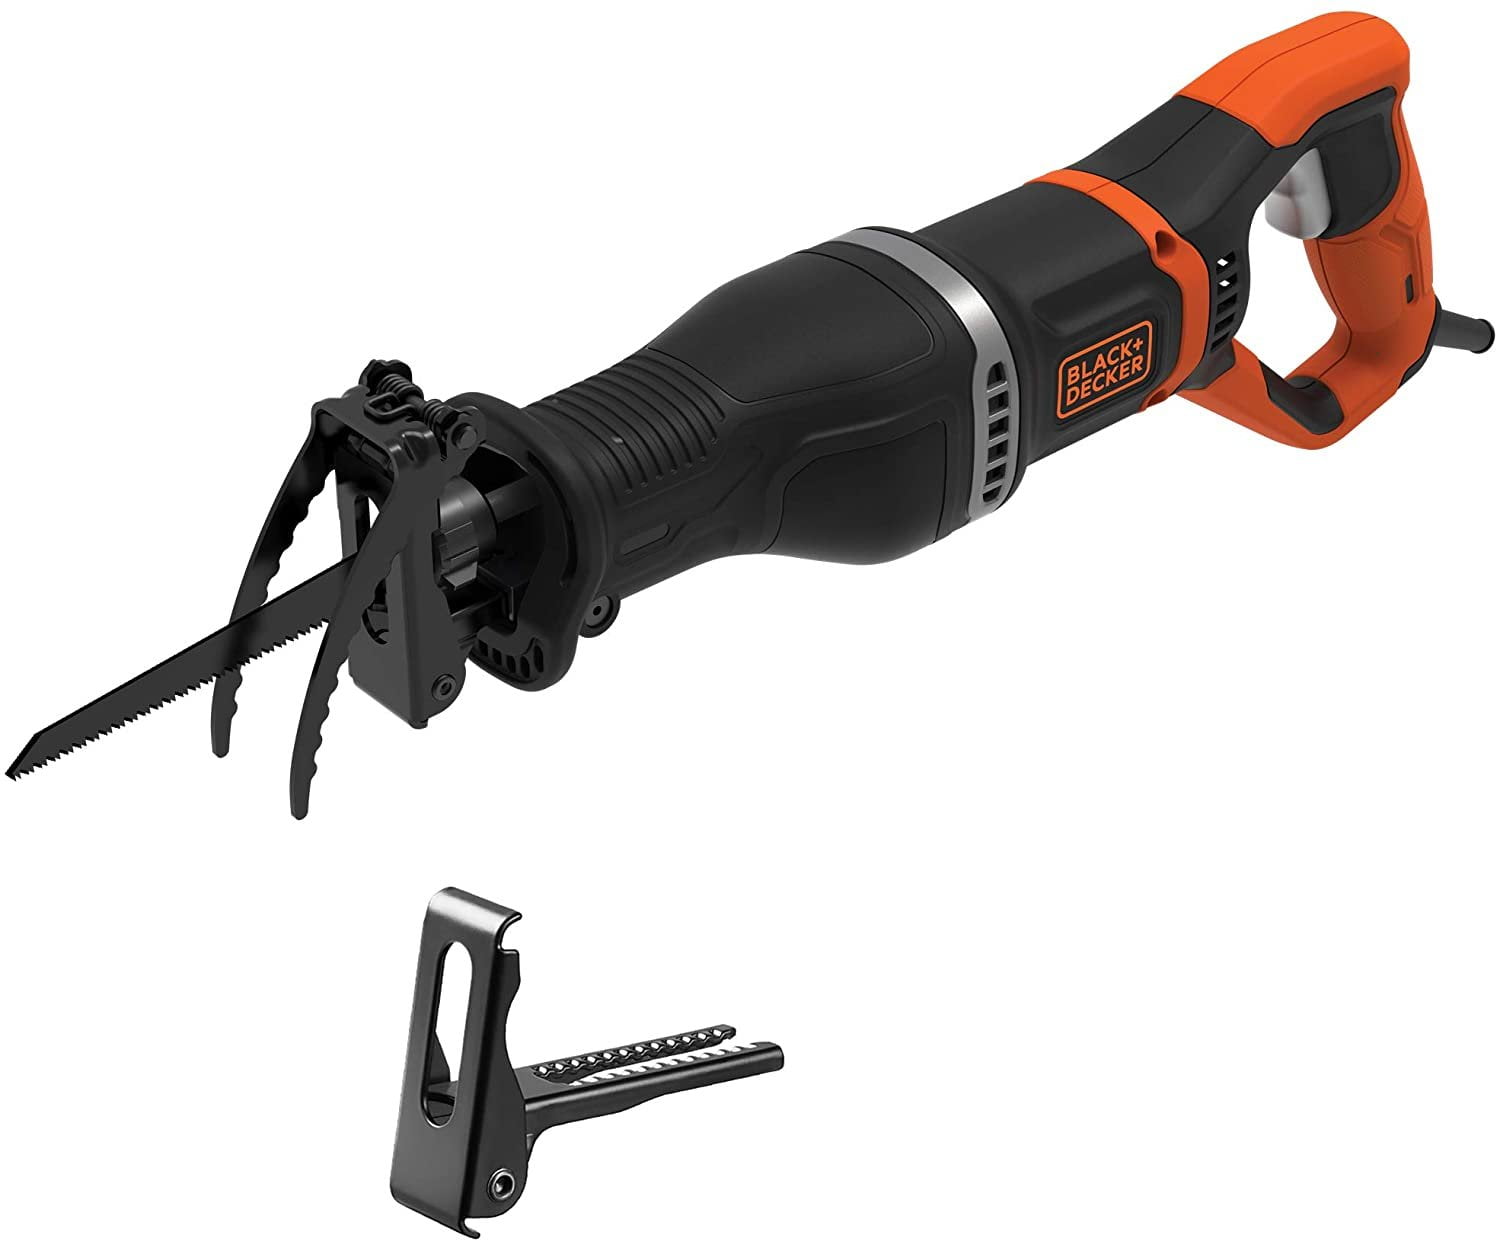 BLACK & DECKER 6-Volt Cordless Reciprocating Saw in the